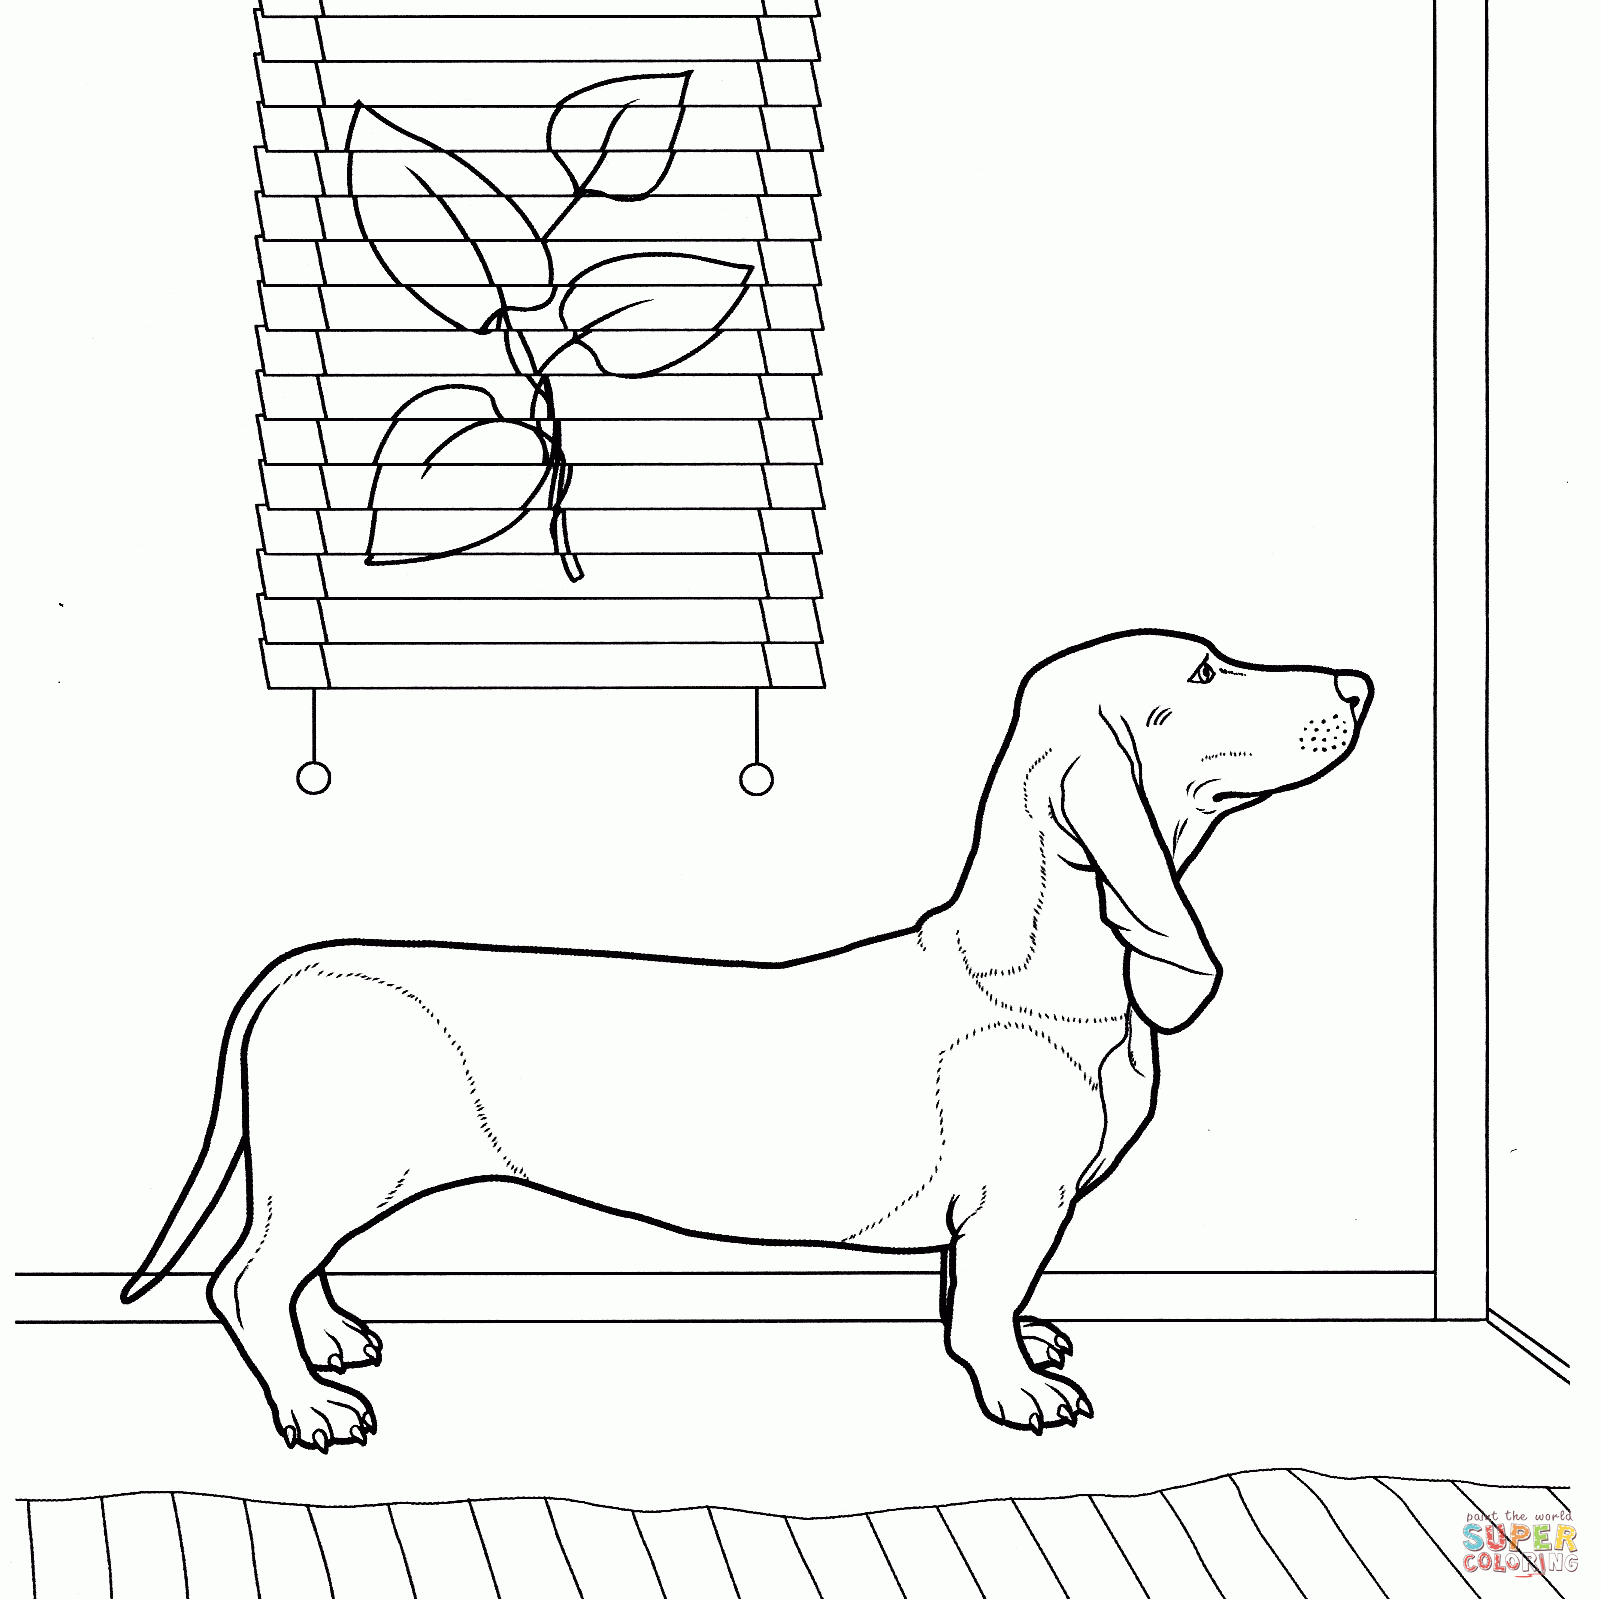 Dachshund Coloring Page | Free Printable Coloring Pages - Free Printable Dachshund Coloring Pages